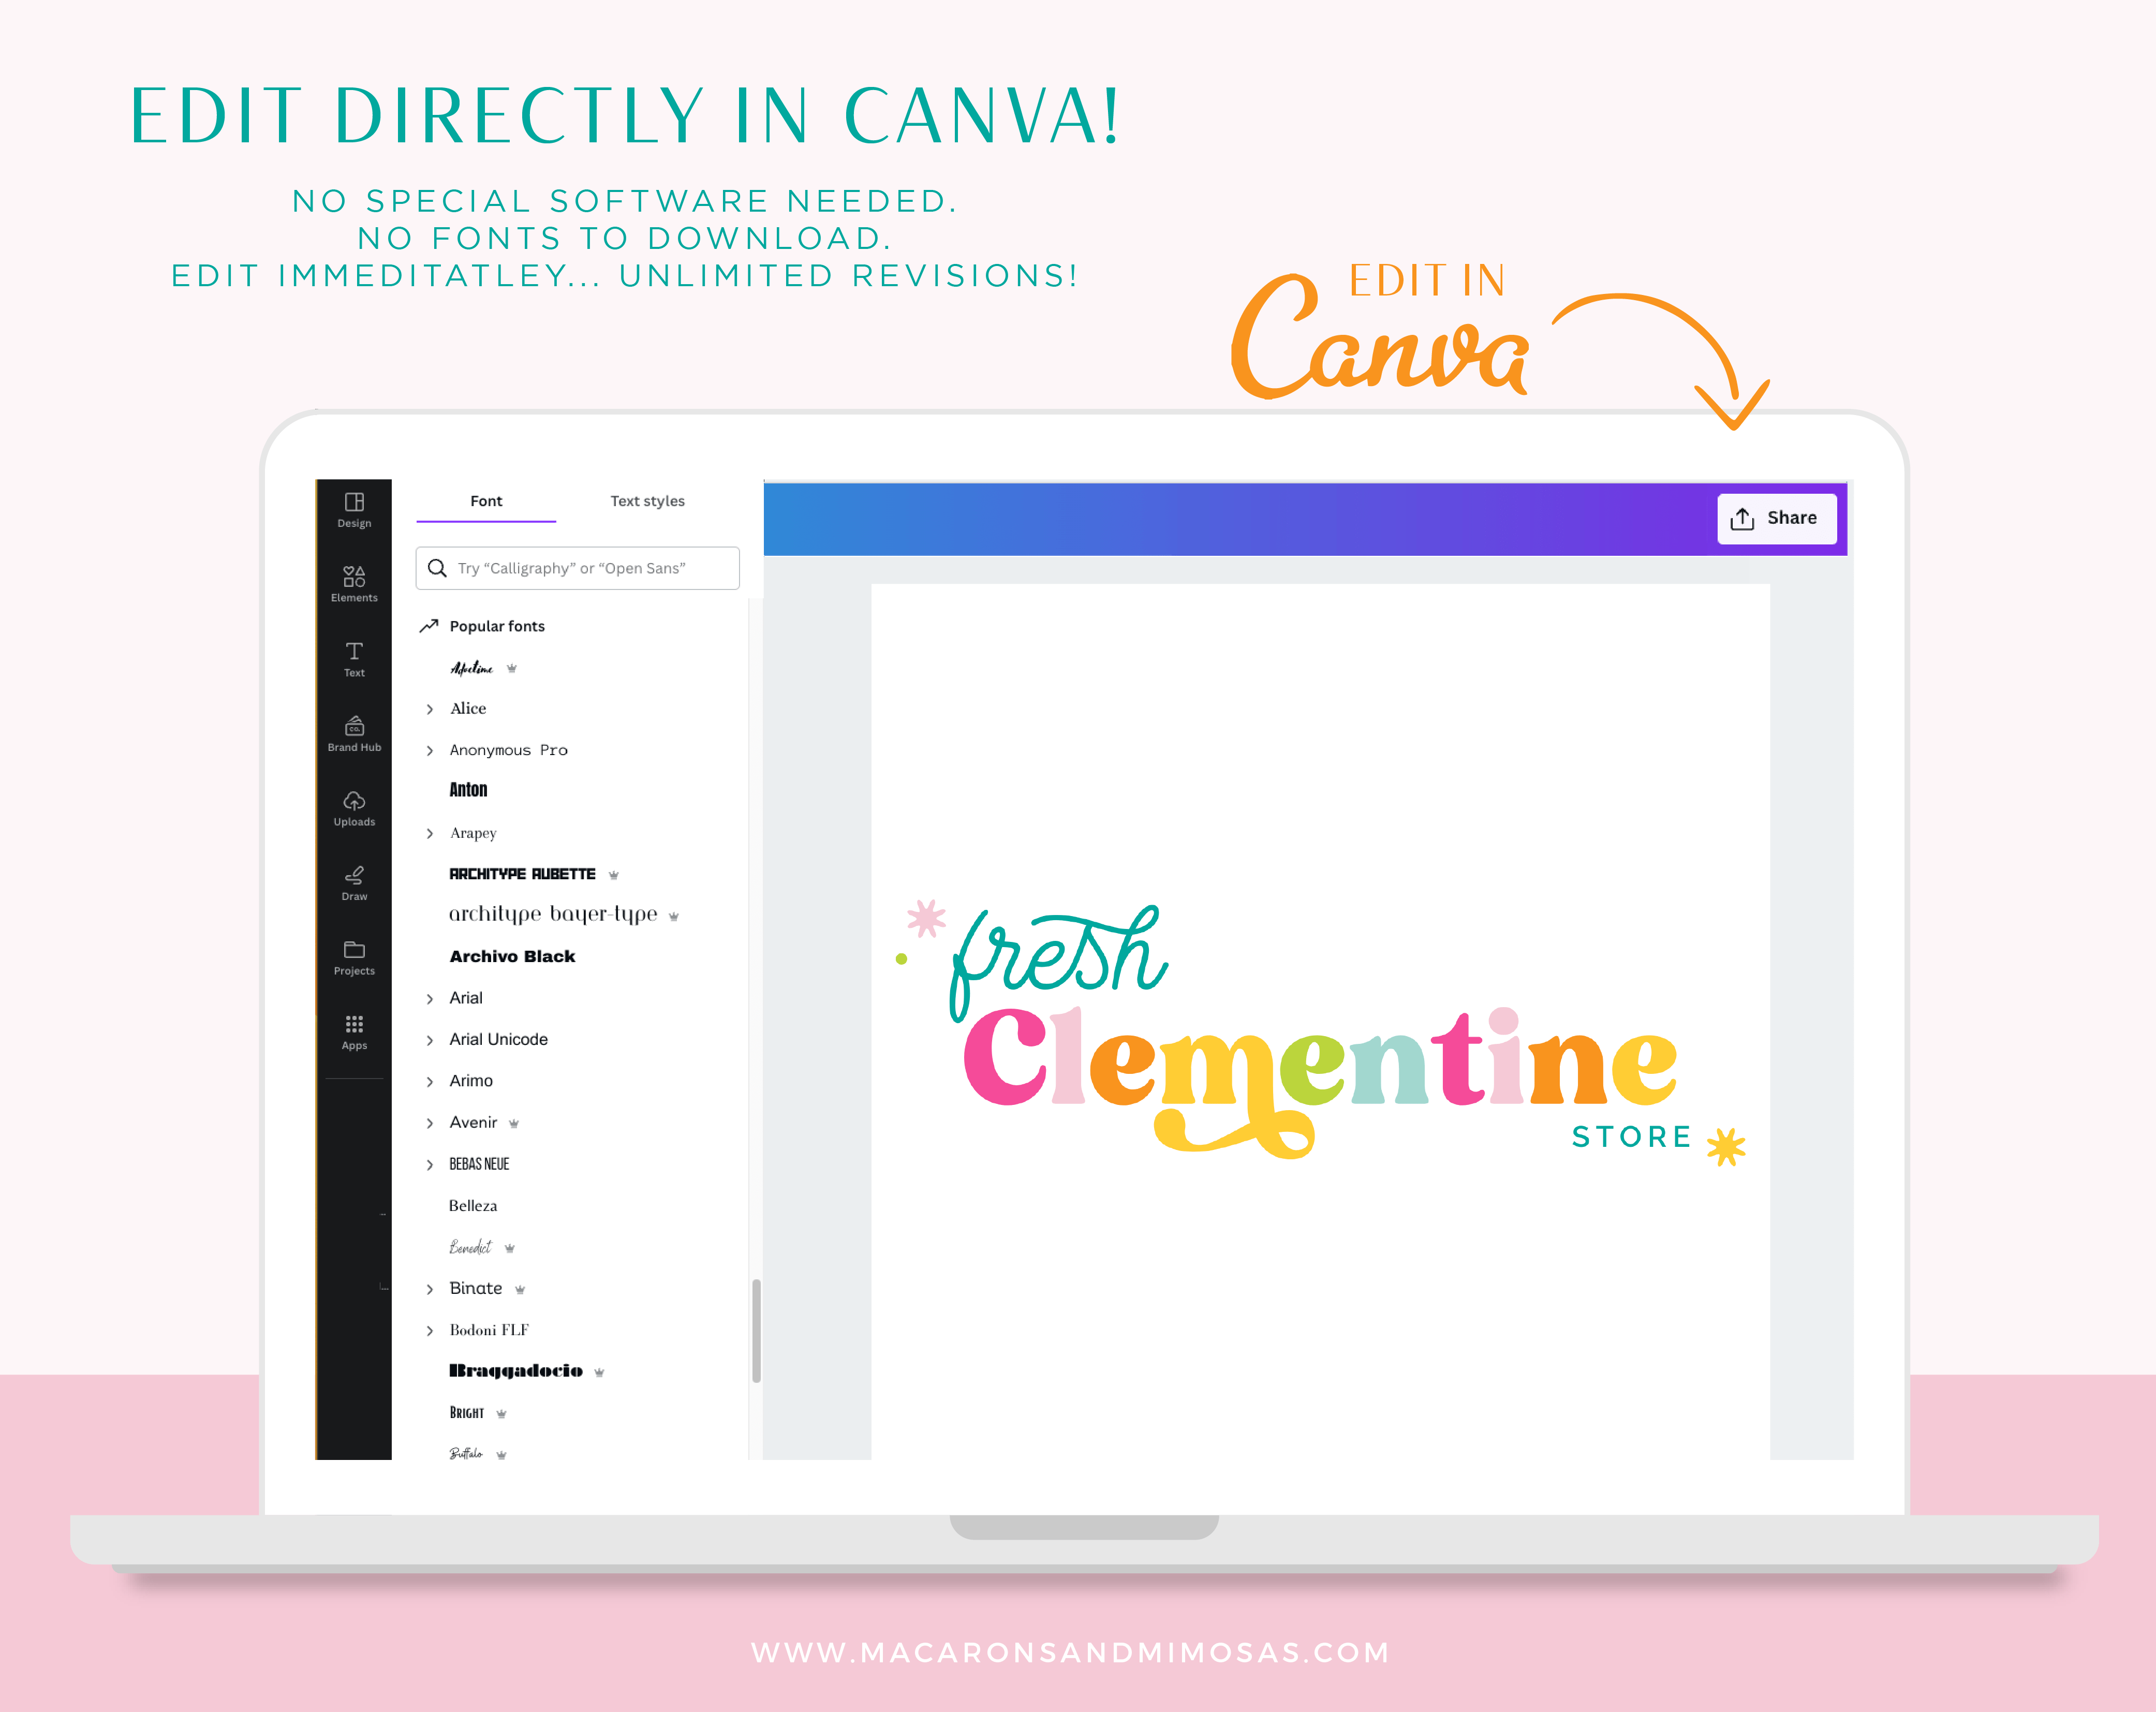 Bright Retro Font Logo with atomic stars edit in Canva, Logo Template Kit with colorful Brand Board template, Boho Stock Photos suggestions, and more! 